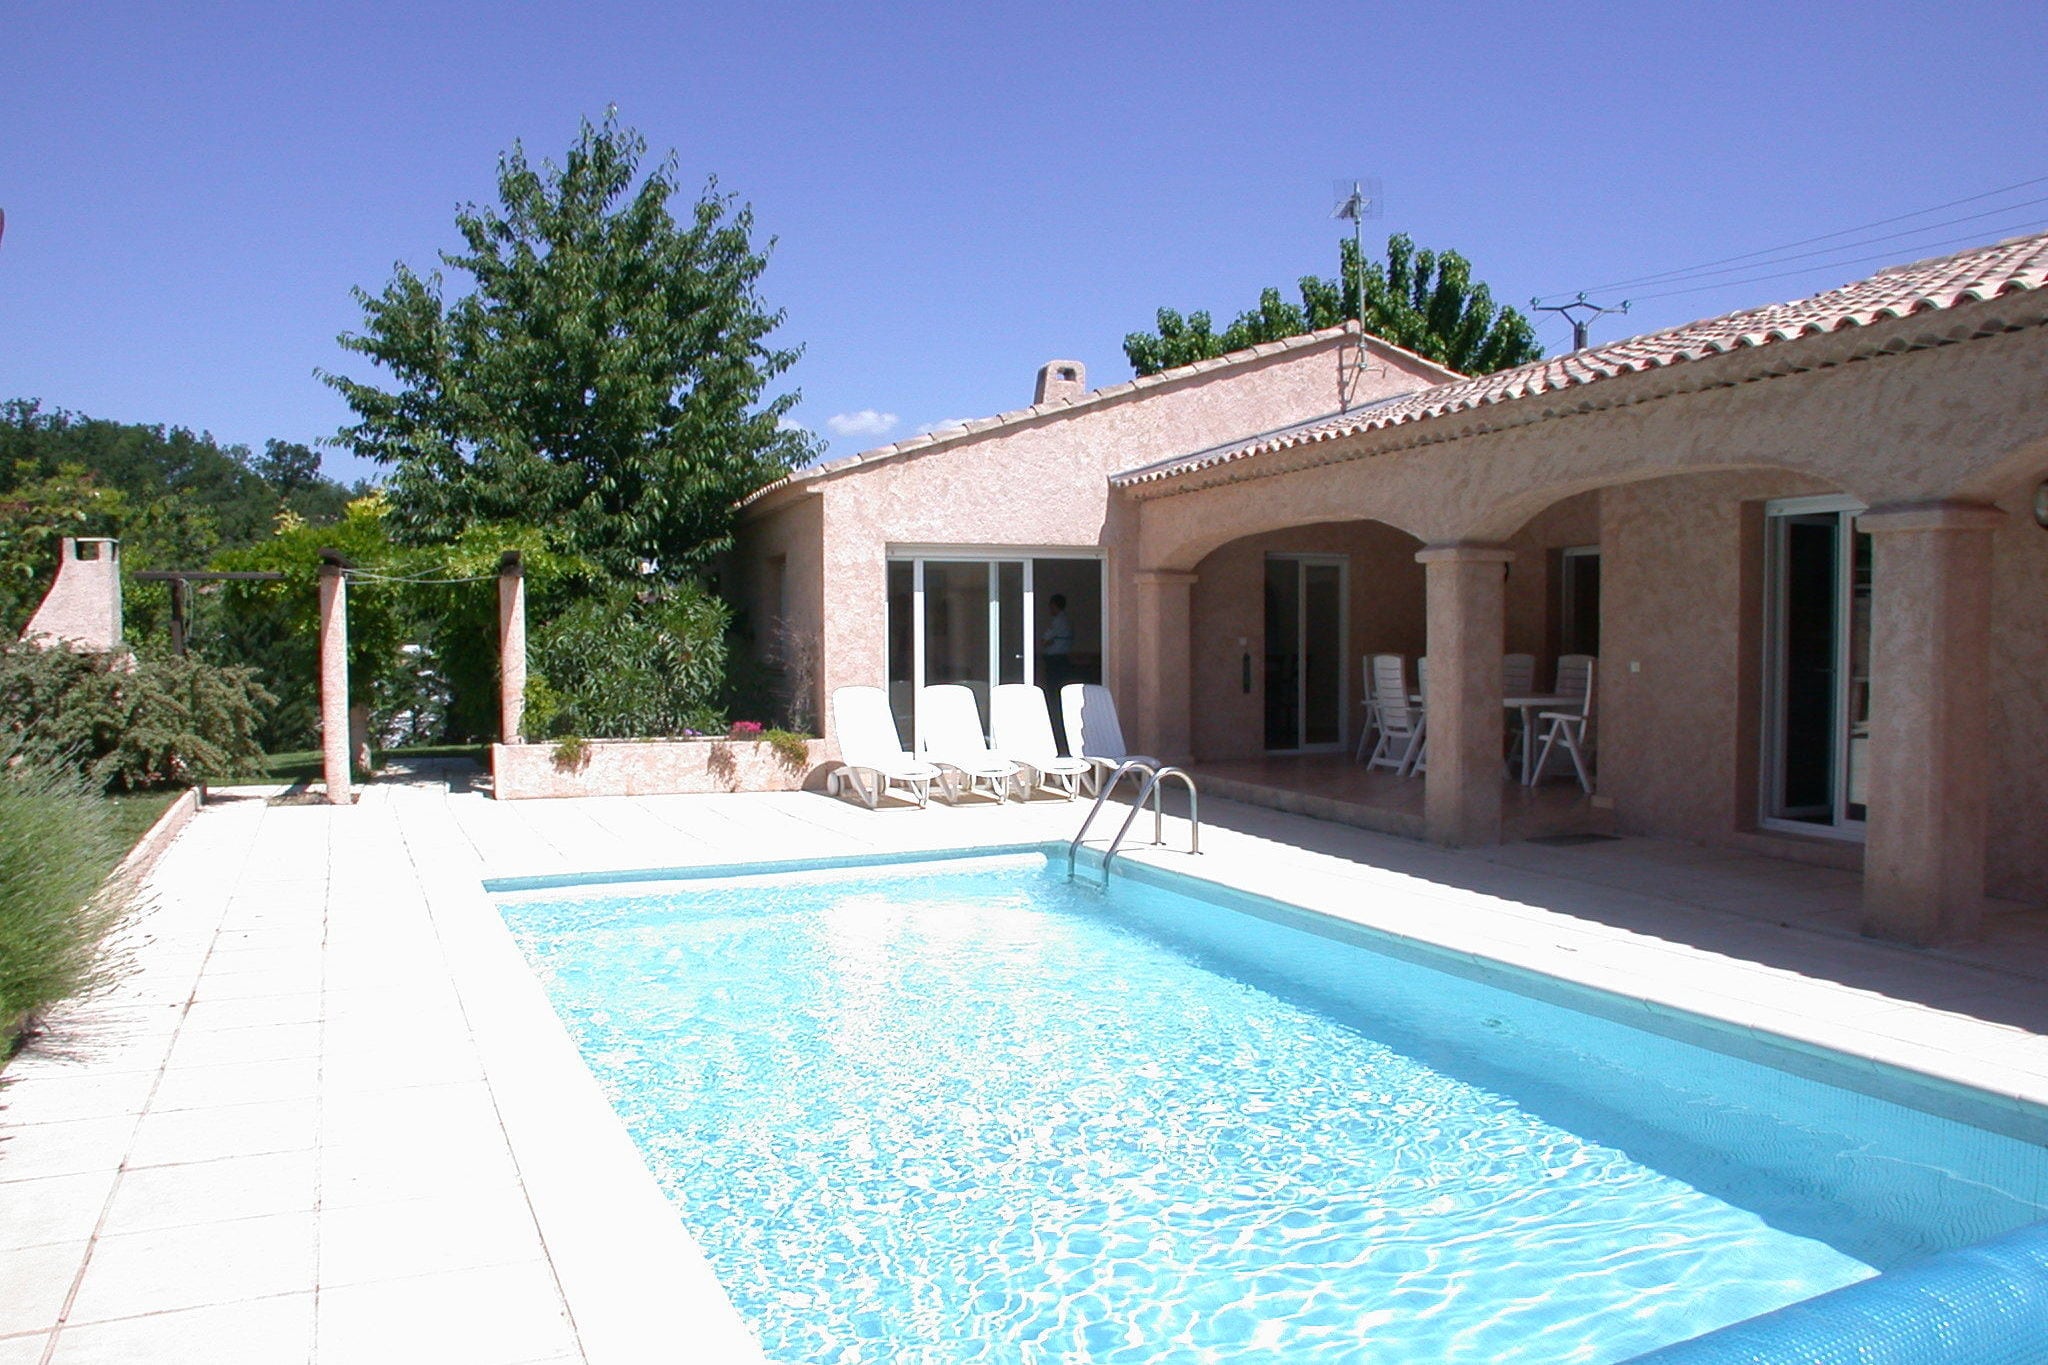 Villa with air conditioning and private pool 1 km from Saint-Paul-en-Foret and 35 km from the sea